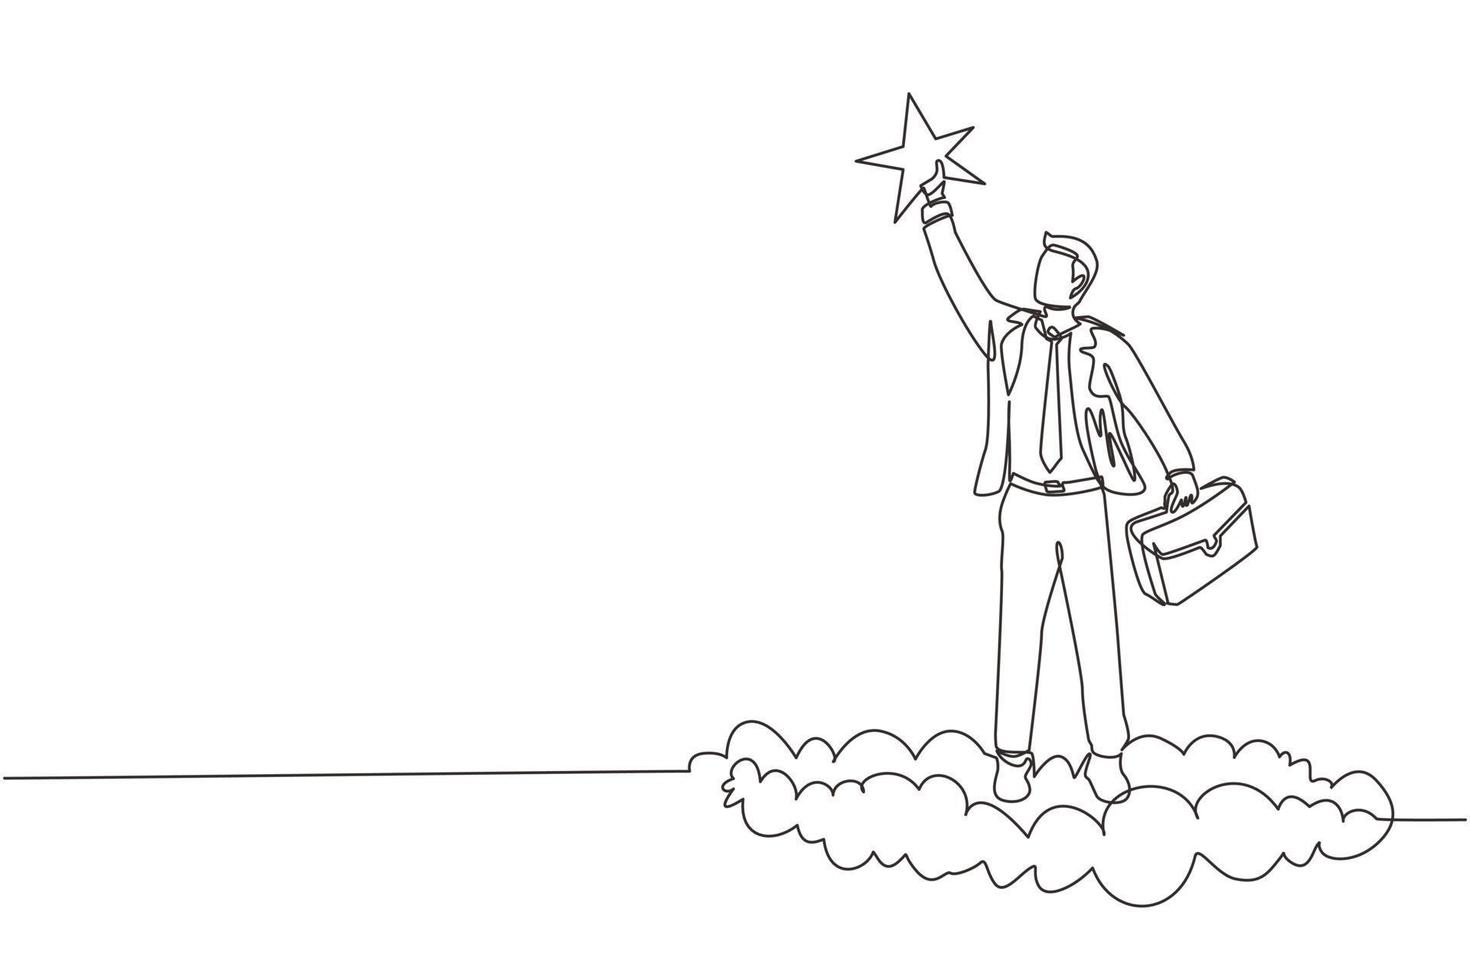 Continuous one line drawing success businessman reaching and grab precious star. Business champion succeed to get reward, winning star employee, career path, dream job. Single line draw design vector